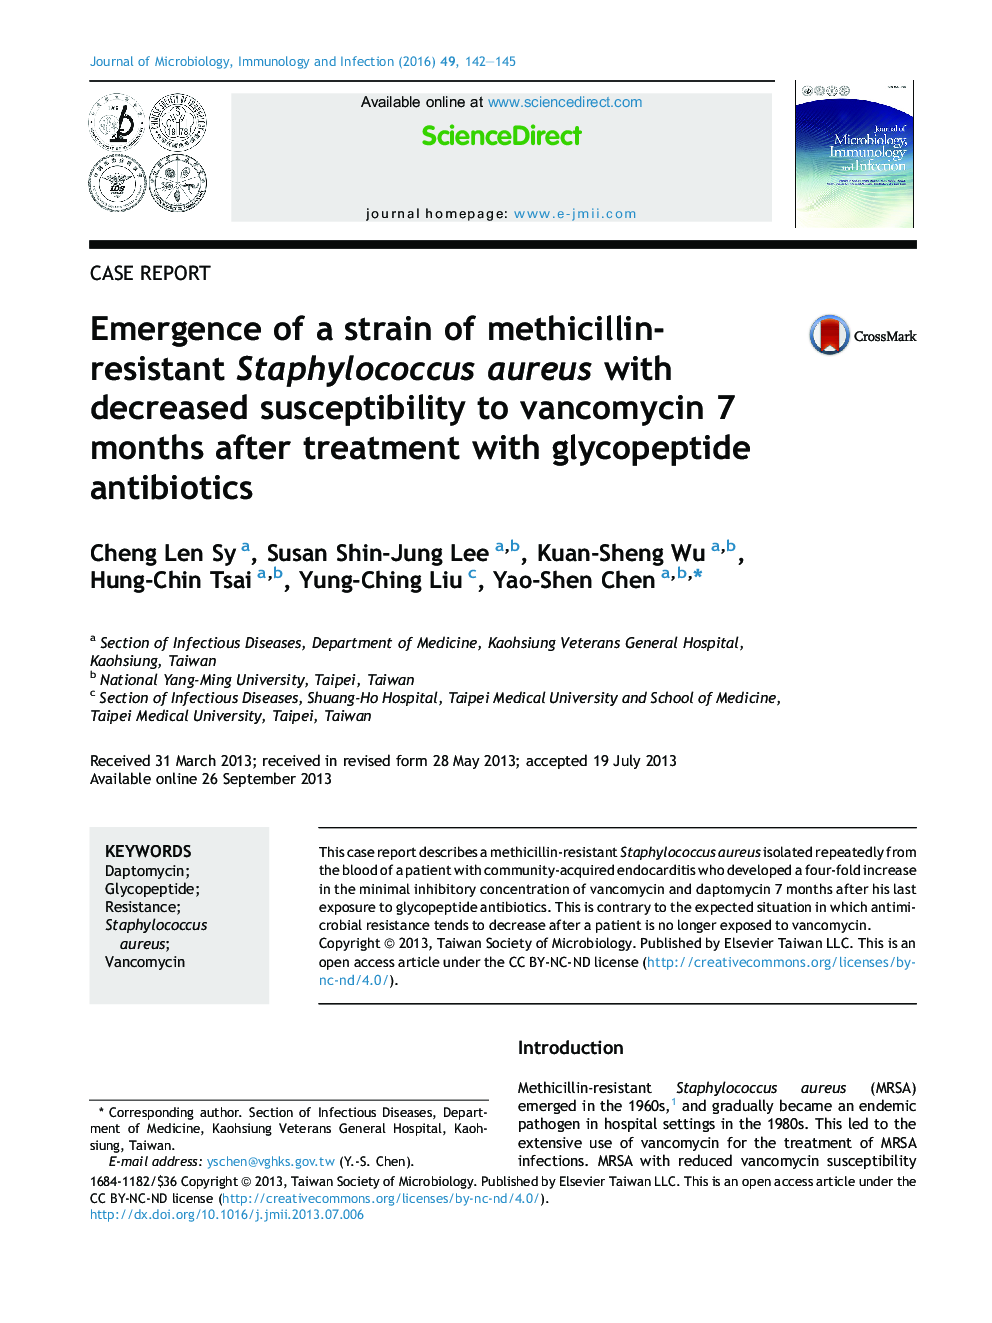 Emergence of a strain of methicillin-resistant Staphylococcus aureus with decreased susceptibility to vancomycin 7 months after treatment with glycopeptide antibiotics